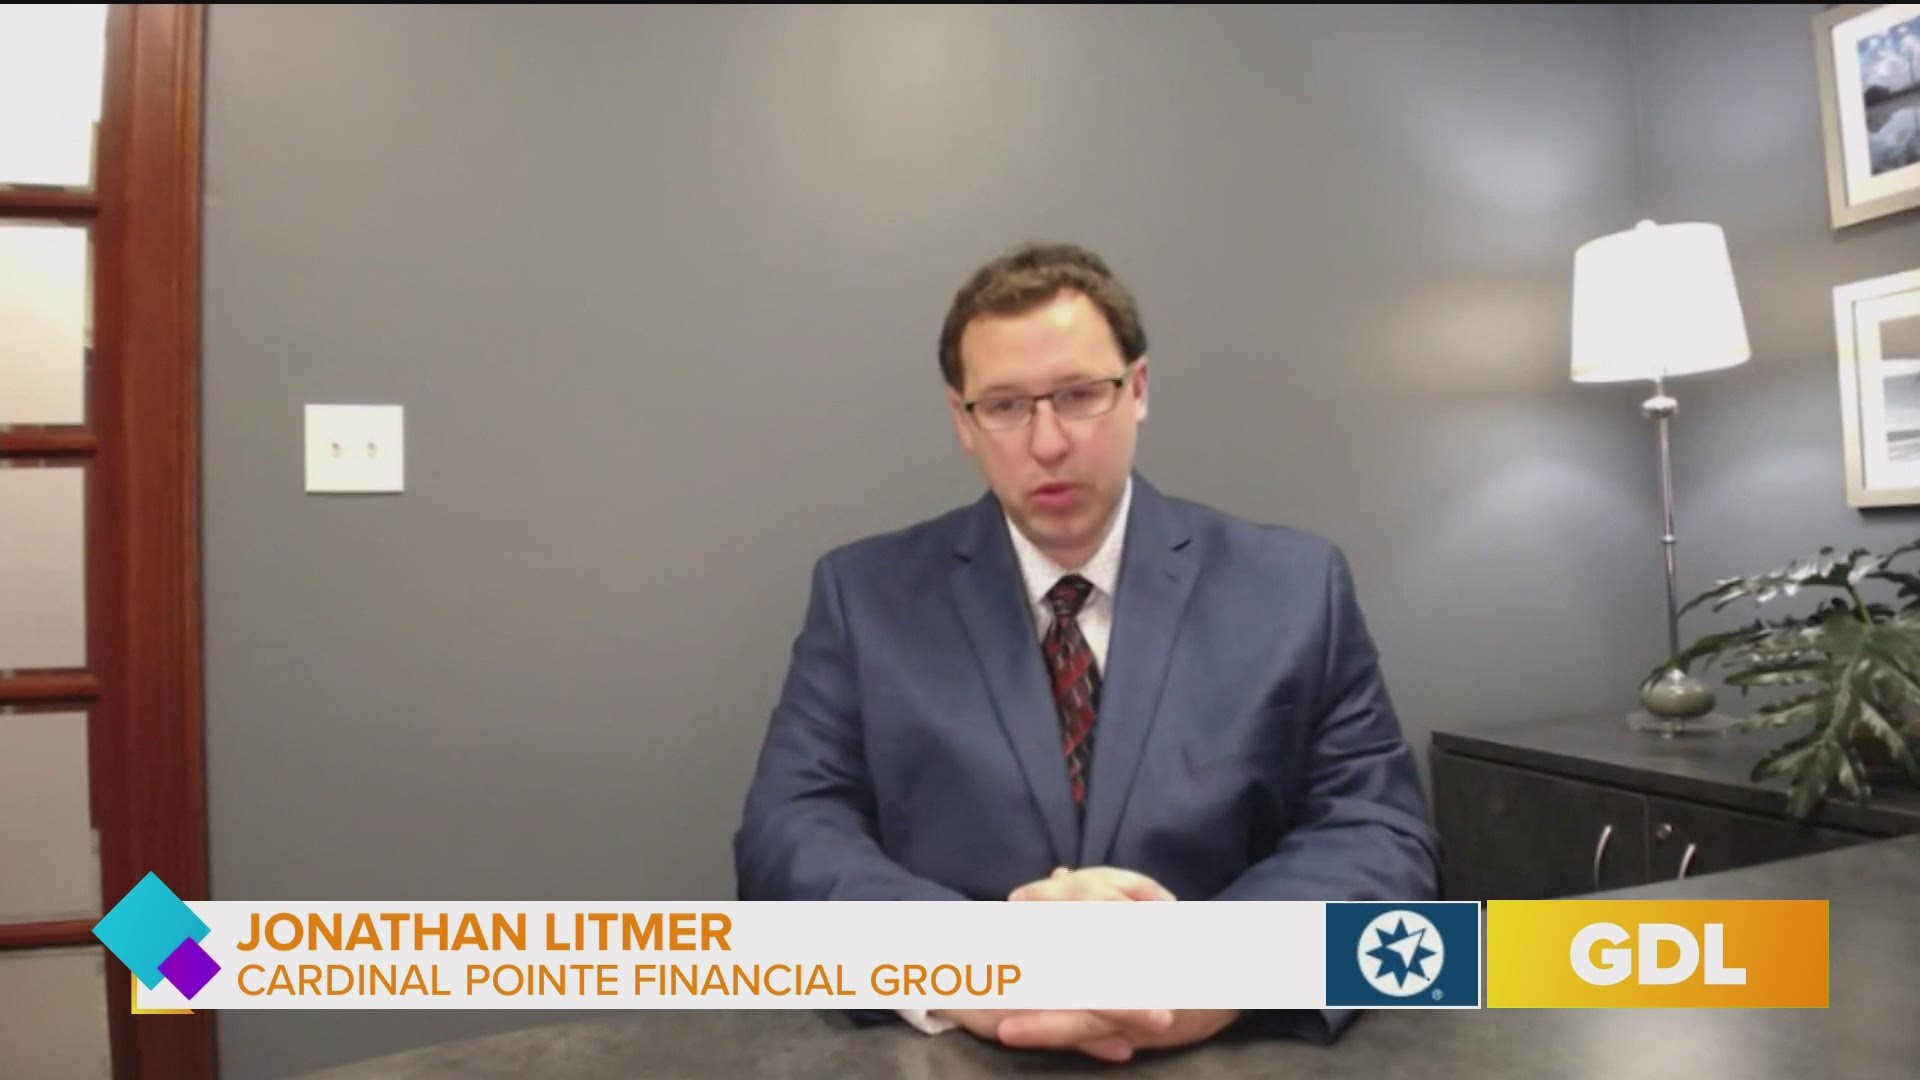 To contact Cardinal Pointe Financial Group, call 502-489-6900.